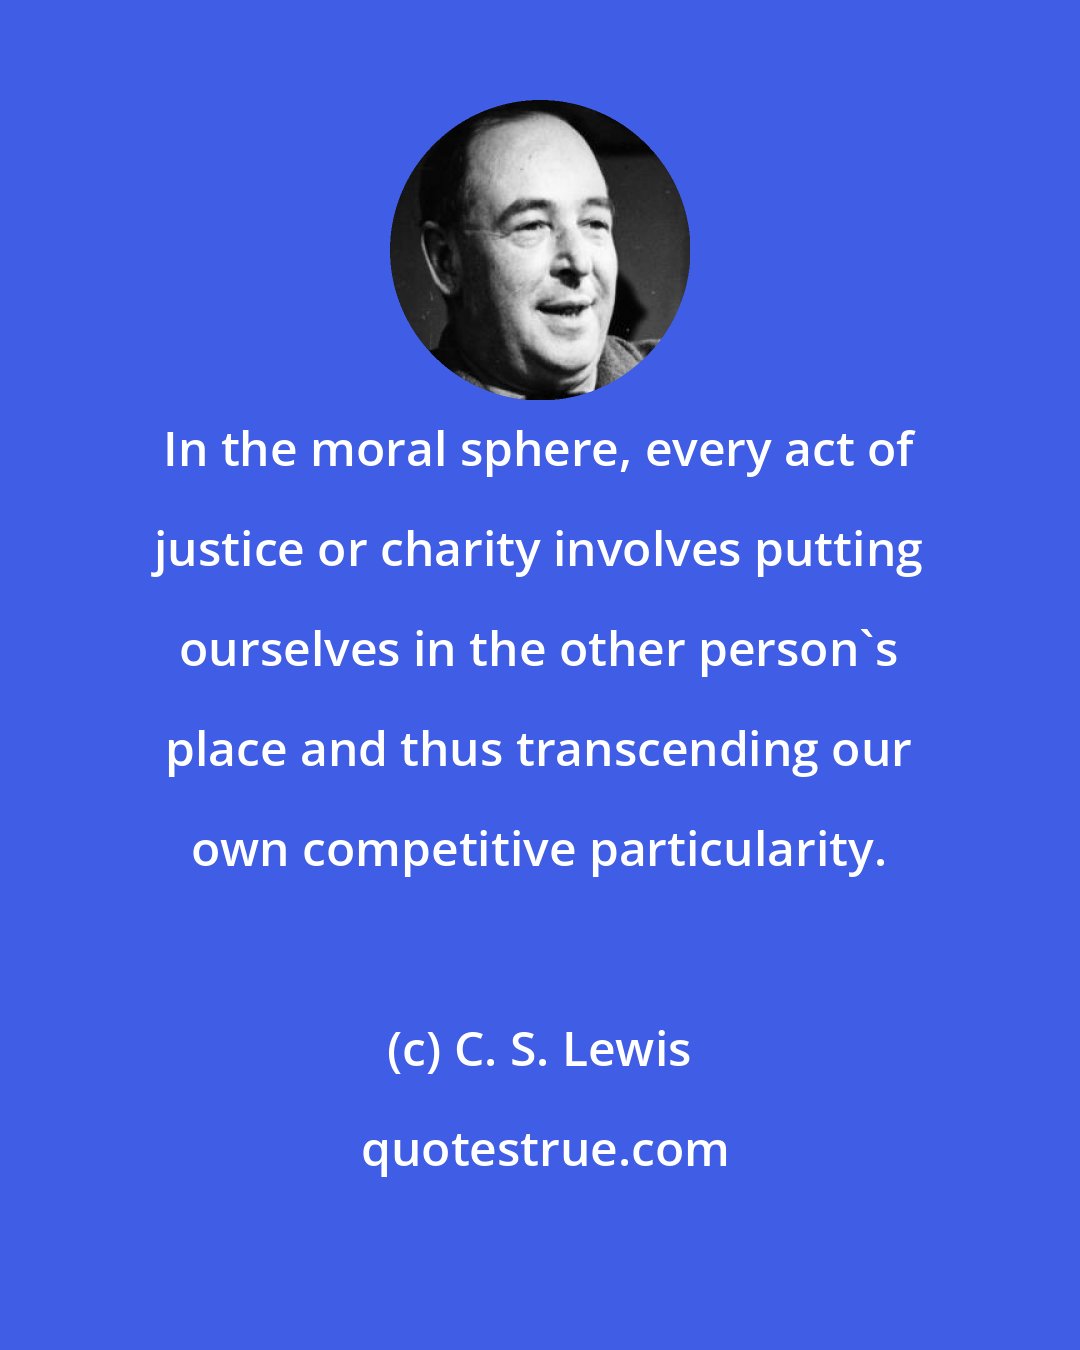 C. S. Lewis: In the moral sphere, every act of justice or charity involves putting ourselves in the other person's place and thus transcending our own competitive particularity.